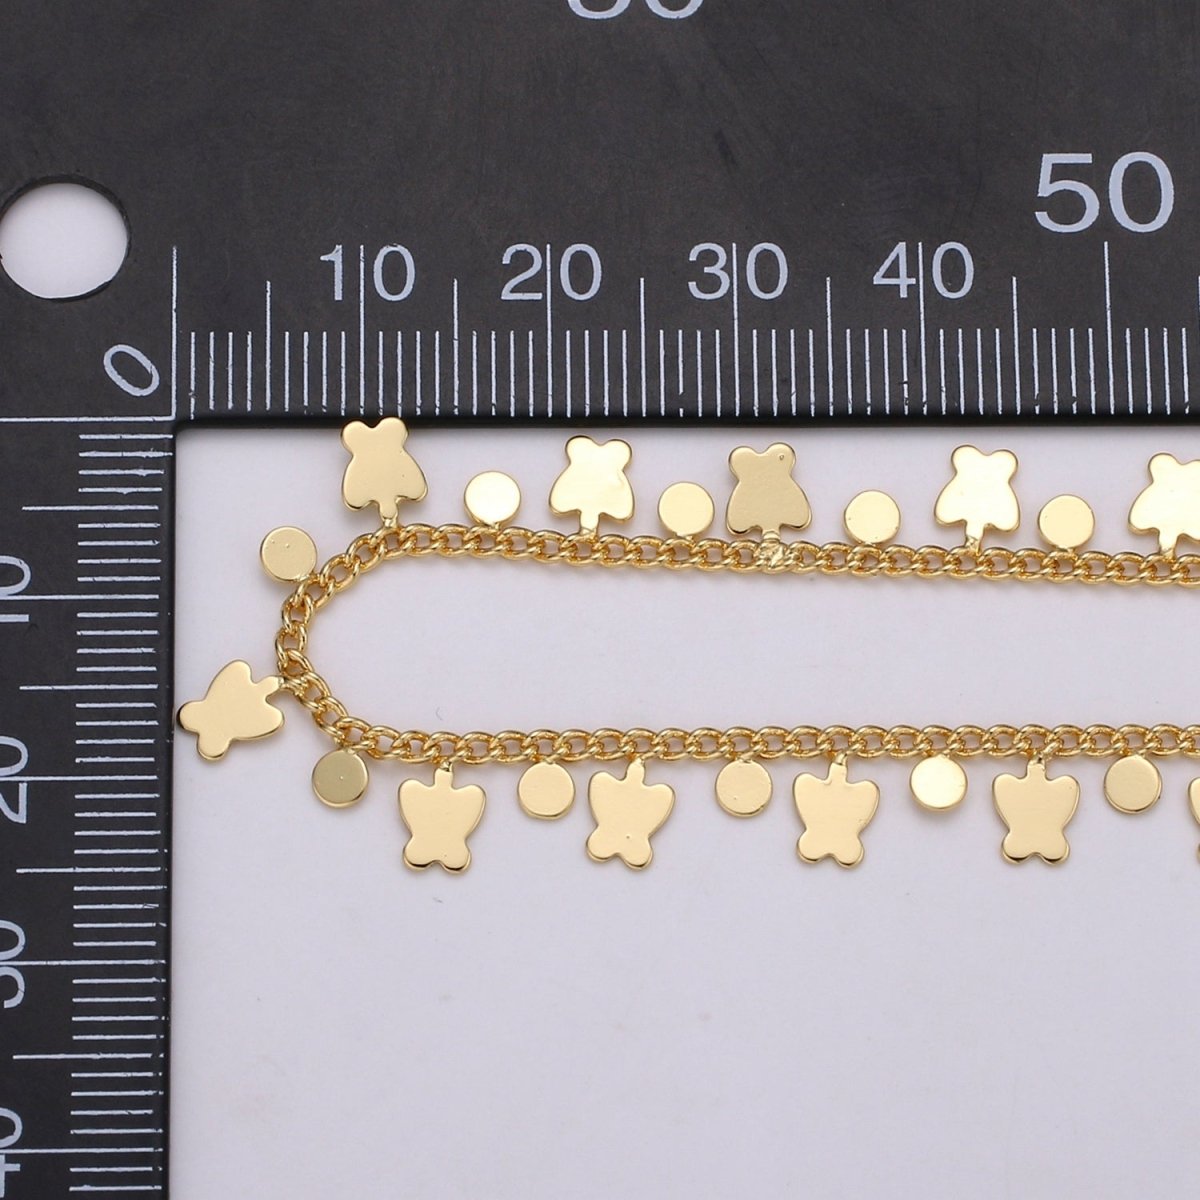 Butterfly Charm, 24K Gold Filled Chain By Yard, Balloon Charm Chain, Wholesale Bilk Roll Chain For Jewelry Making, Width 5mm, CURB DESIGNED Unfinished Chain | ROLL-352 Clearance Pricing - DLUXCA